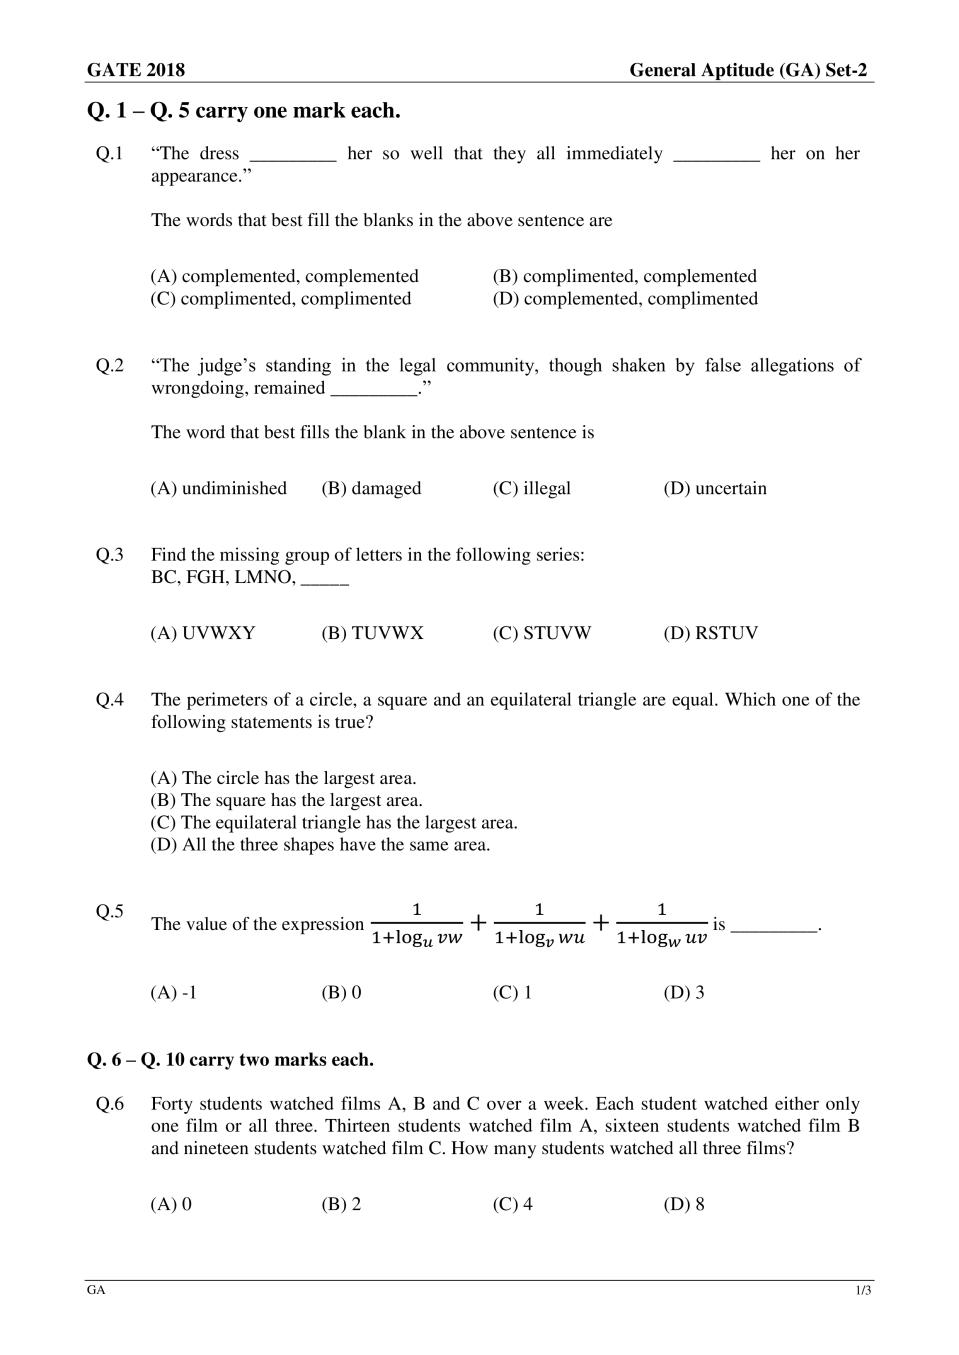 GATE 2018 Aerospace Engineering (AE) Question Paper with Answer - Page 1